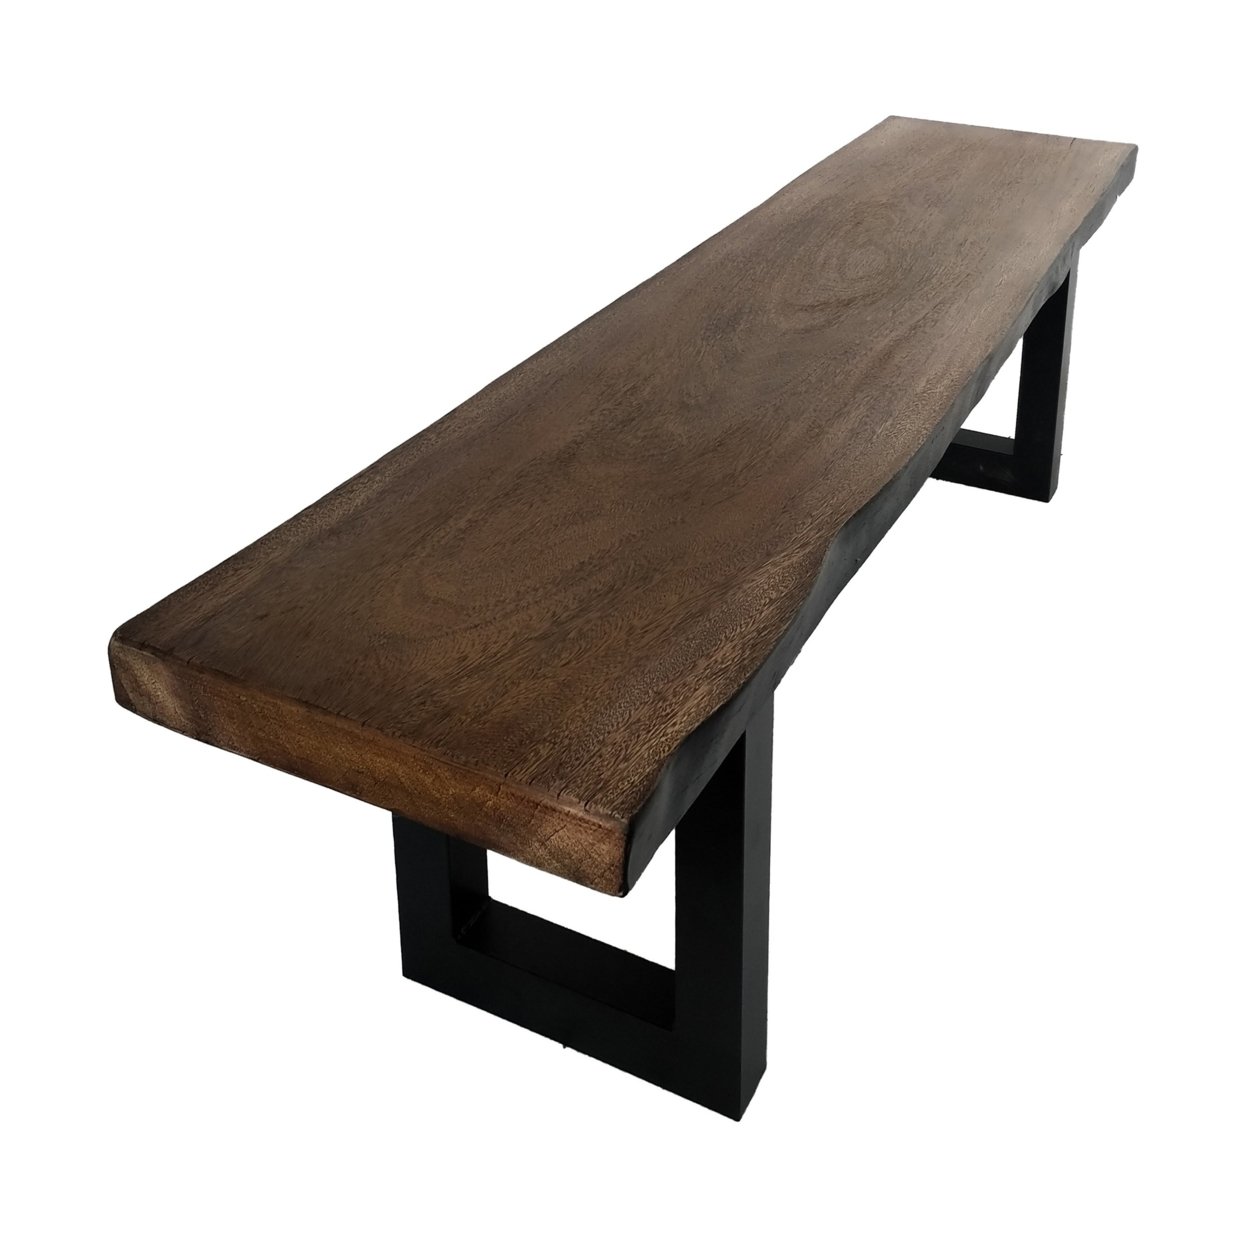 Jessica Indoor Faux Live Edge Teak Finish Light Weight Concrete Dining Bench